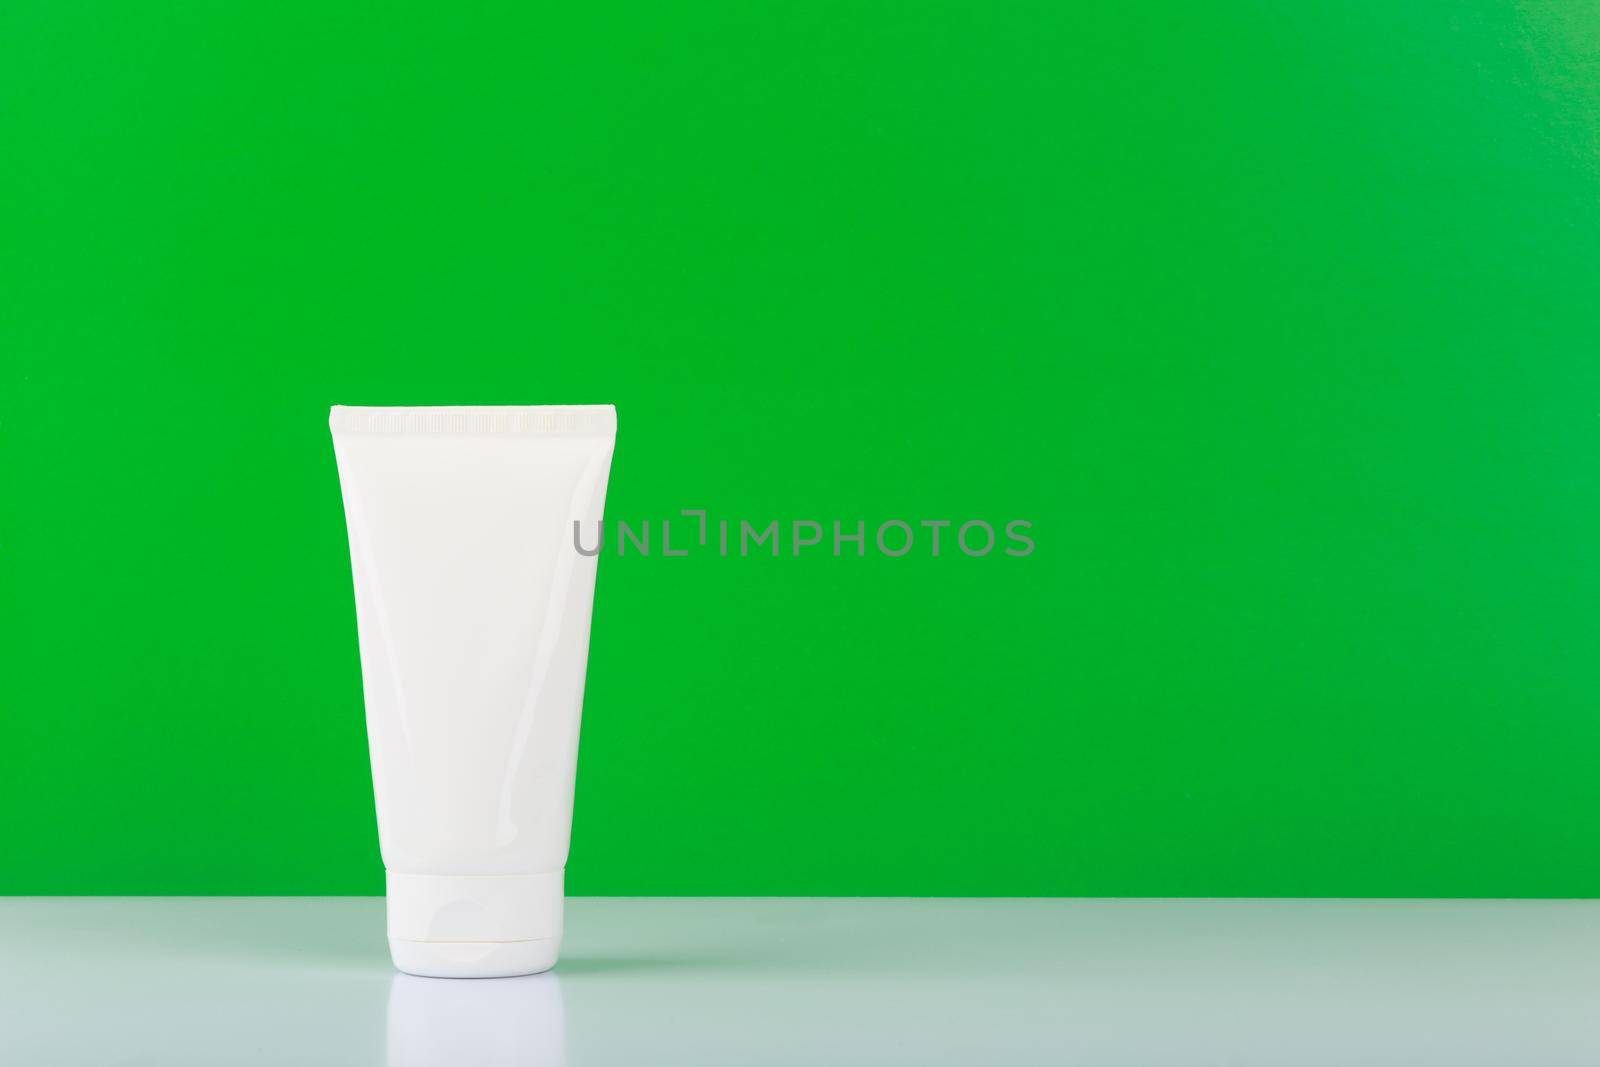 Hands cream in white plastic tube against green background with copy space. Concept of skin care product with natural ingredients and oils, aloe vera, cucumber or green tea. Moisturizing hands cream